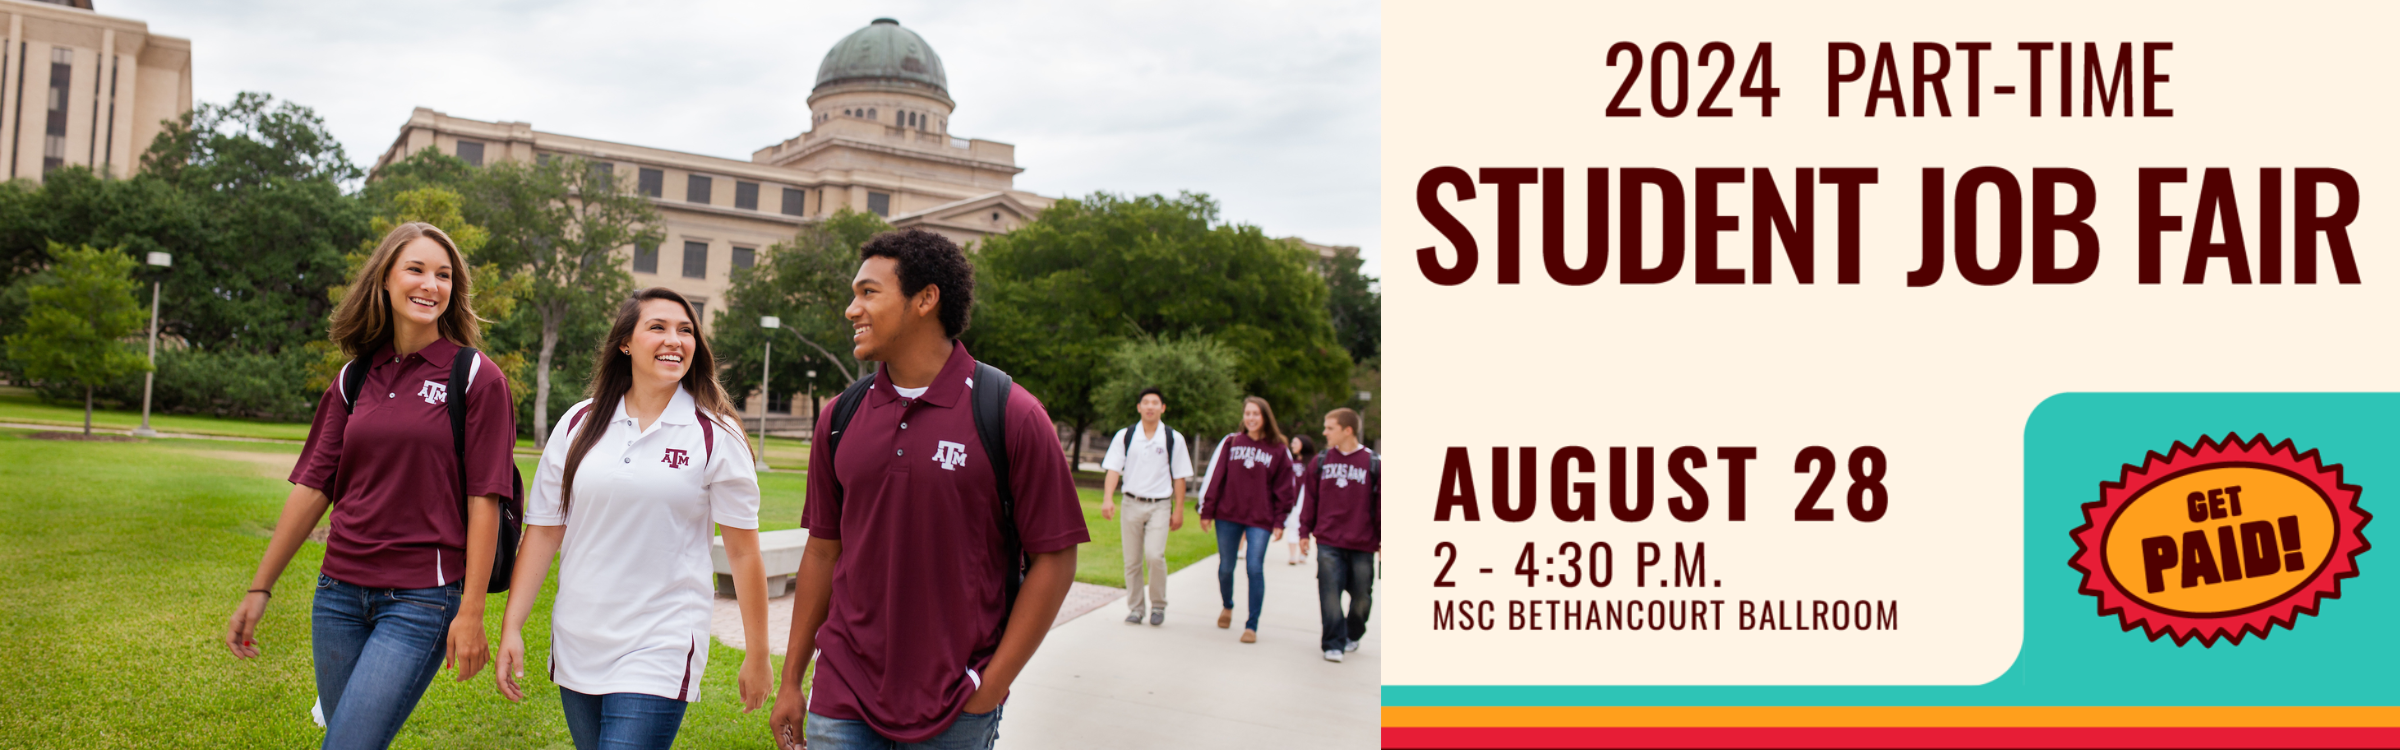 Fall 2024 Part-Time Student Job Fair Wed., August 28, 2024 